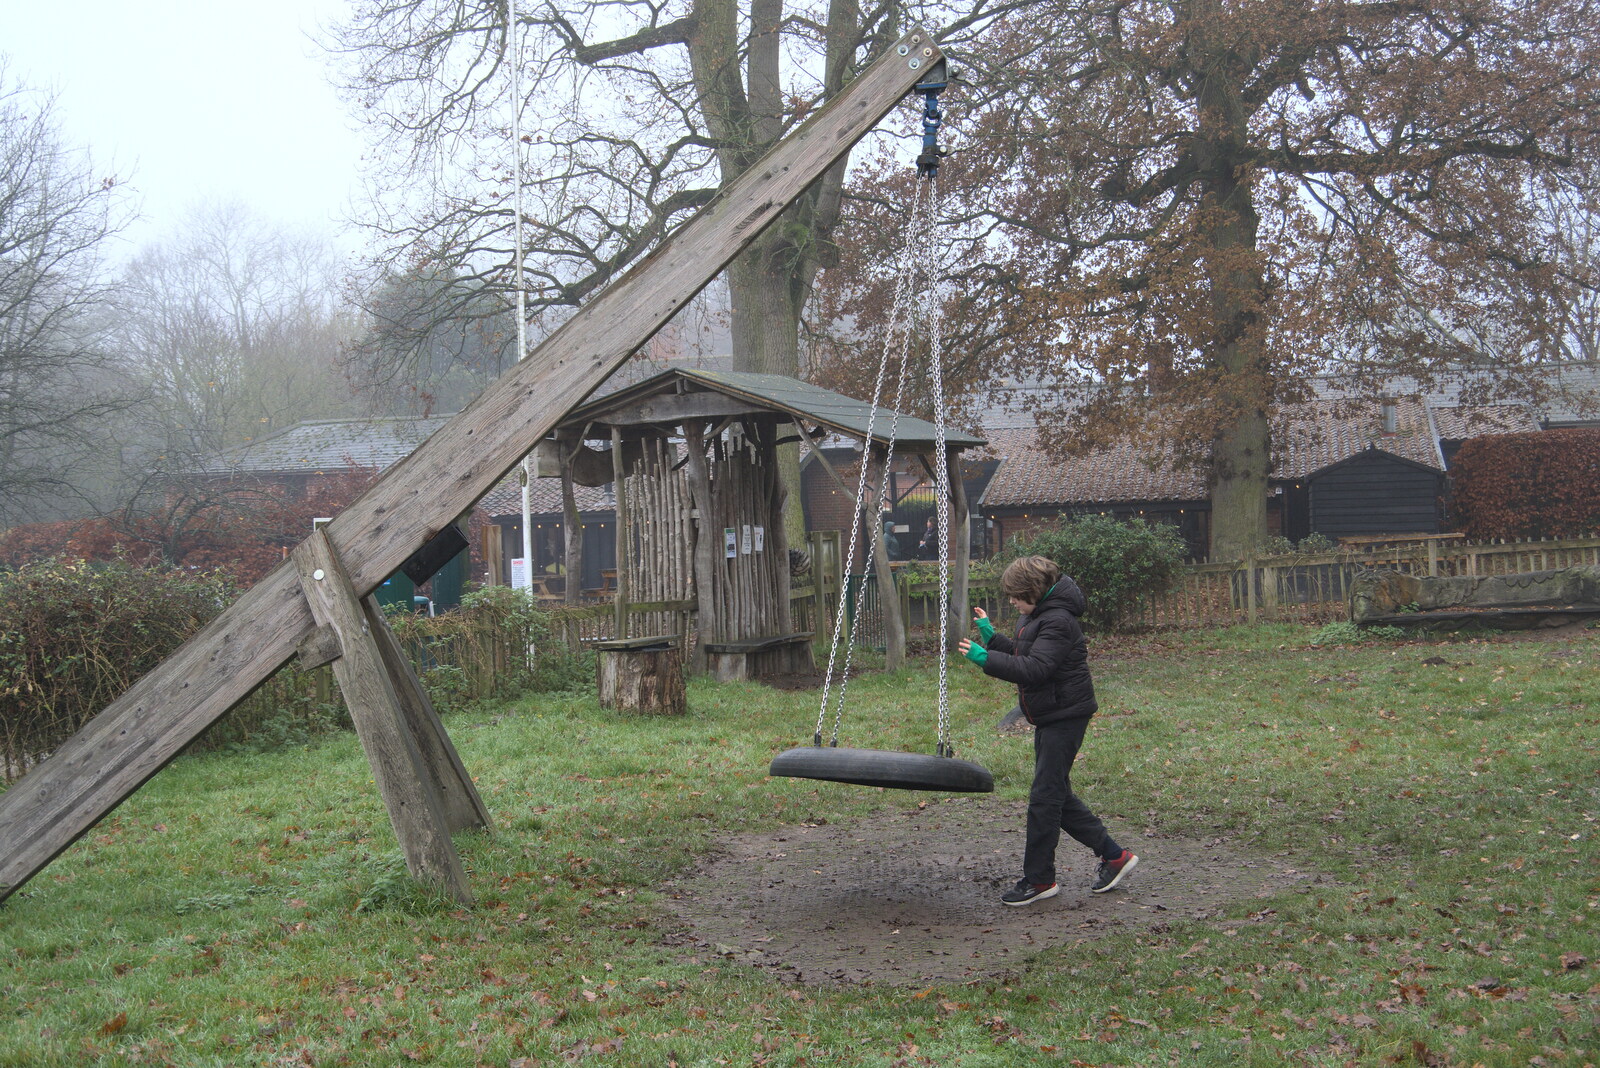 Fred takes on the tyre swing from A Return to Thornham Walks, Thornham, Suffolk - 19th December 2021